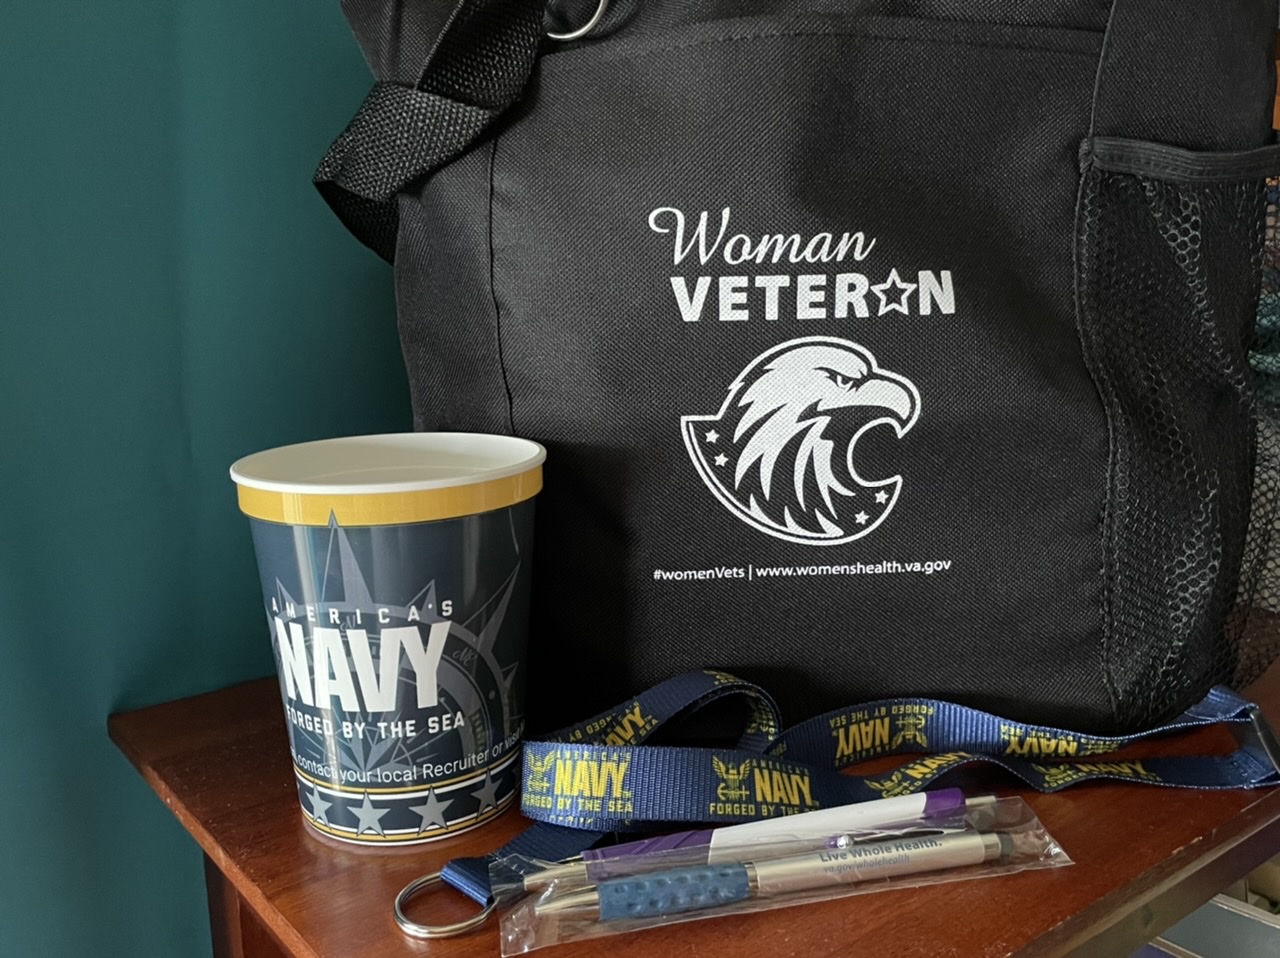 The freebies from the Women Veterans’ Day at the VA Hospital.  Photo taken by and the property of FourWalls.